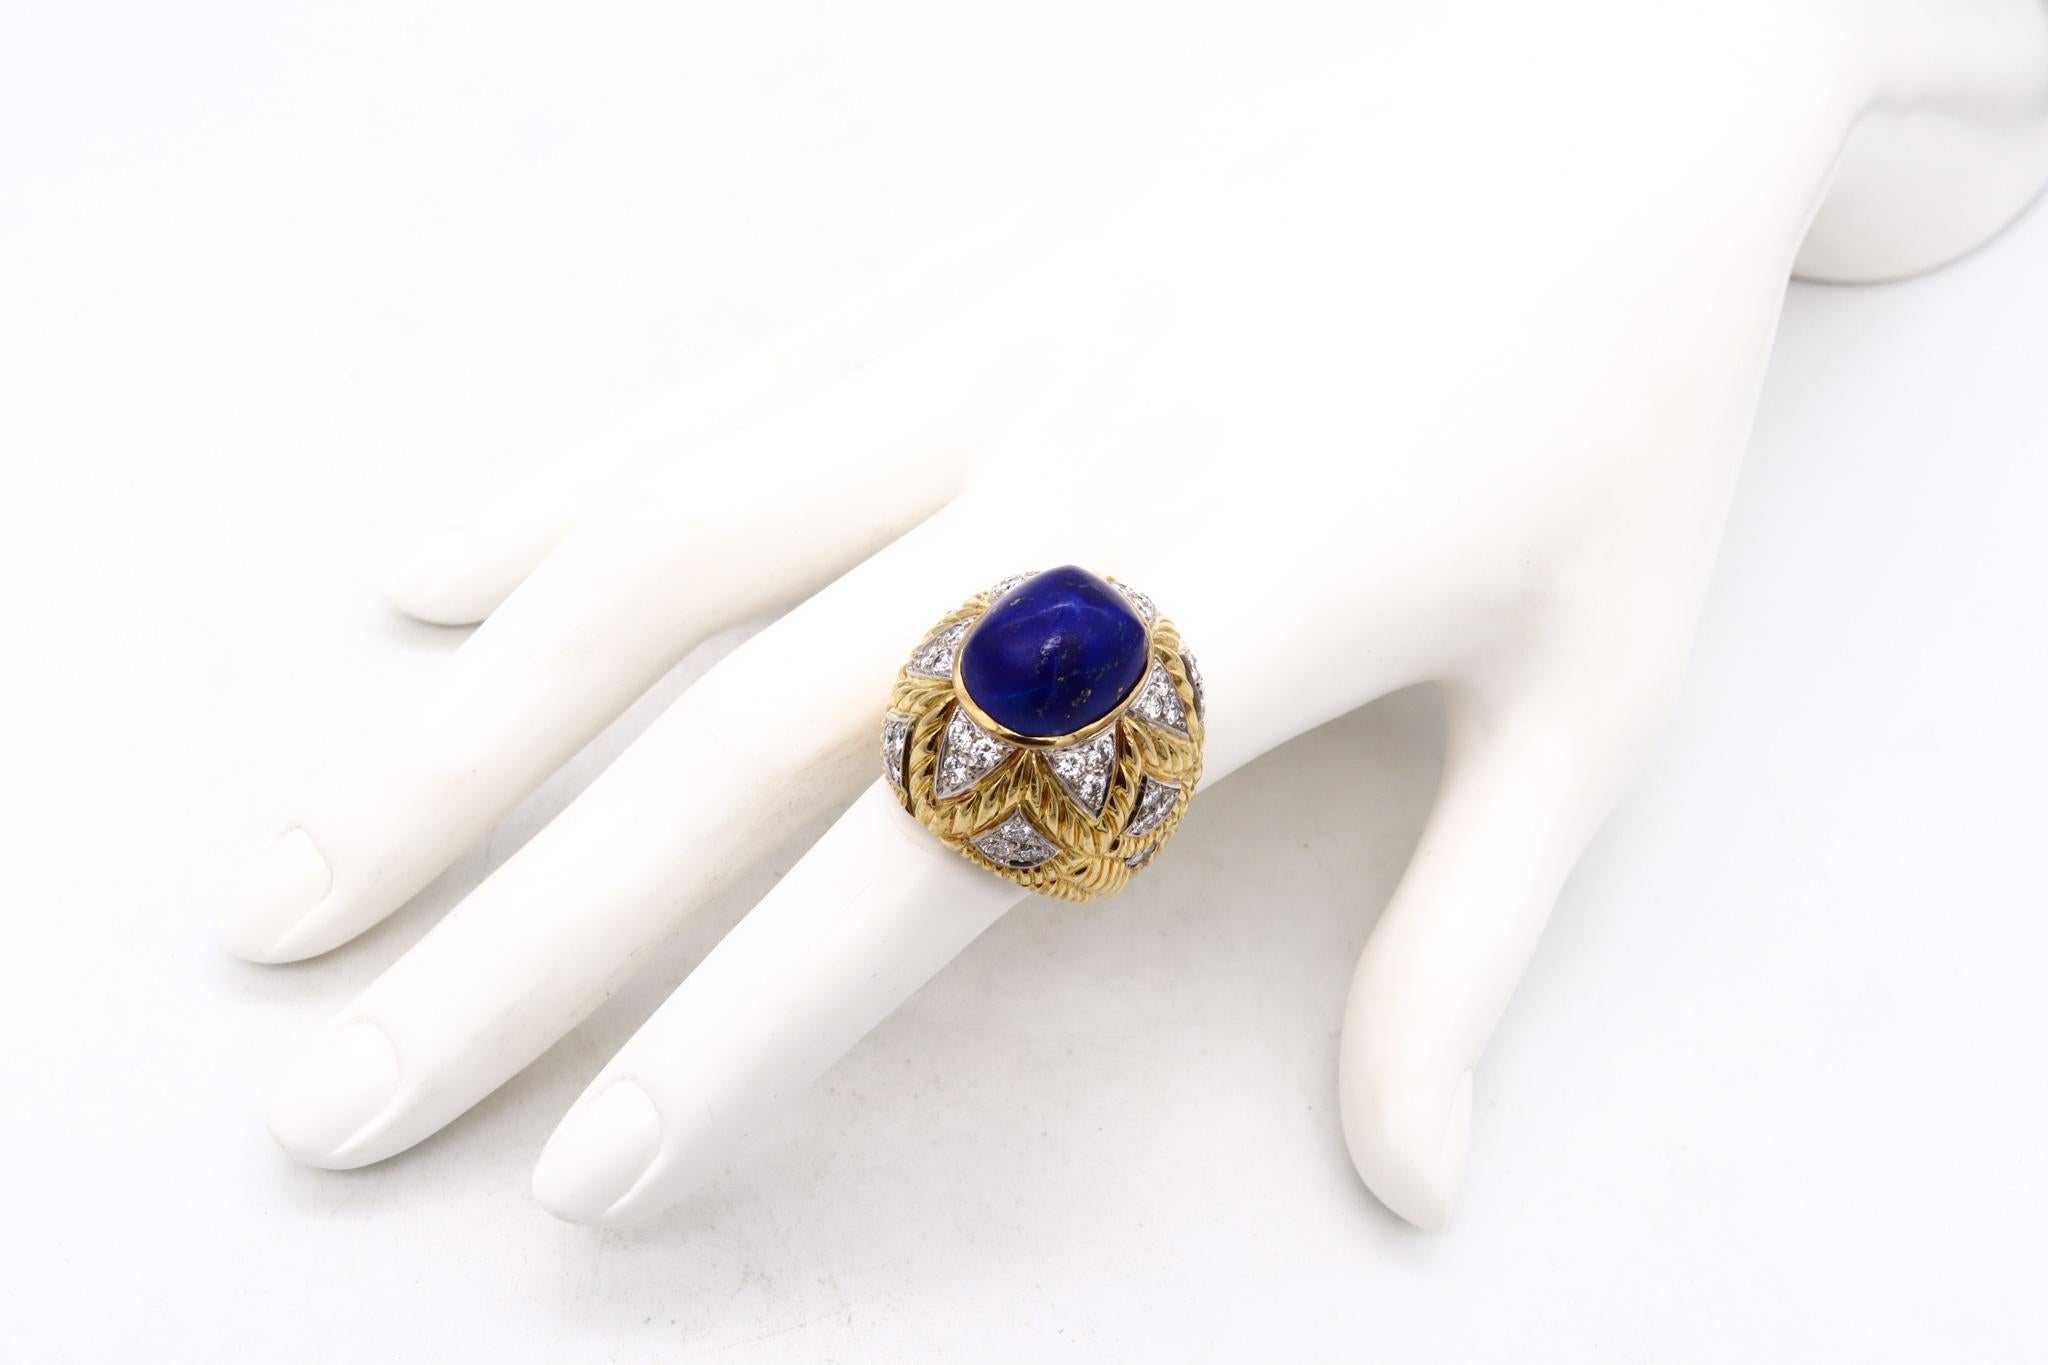 Italian designer cocktail ring with gemstones.

A gorgeous jewelry piece from the Italian mid-century period, circa 1960. This bold oversized cocktail ring has been crafted in solid 18 karats yellow gold with texturized surfaces and white gold